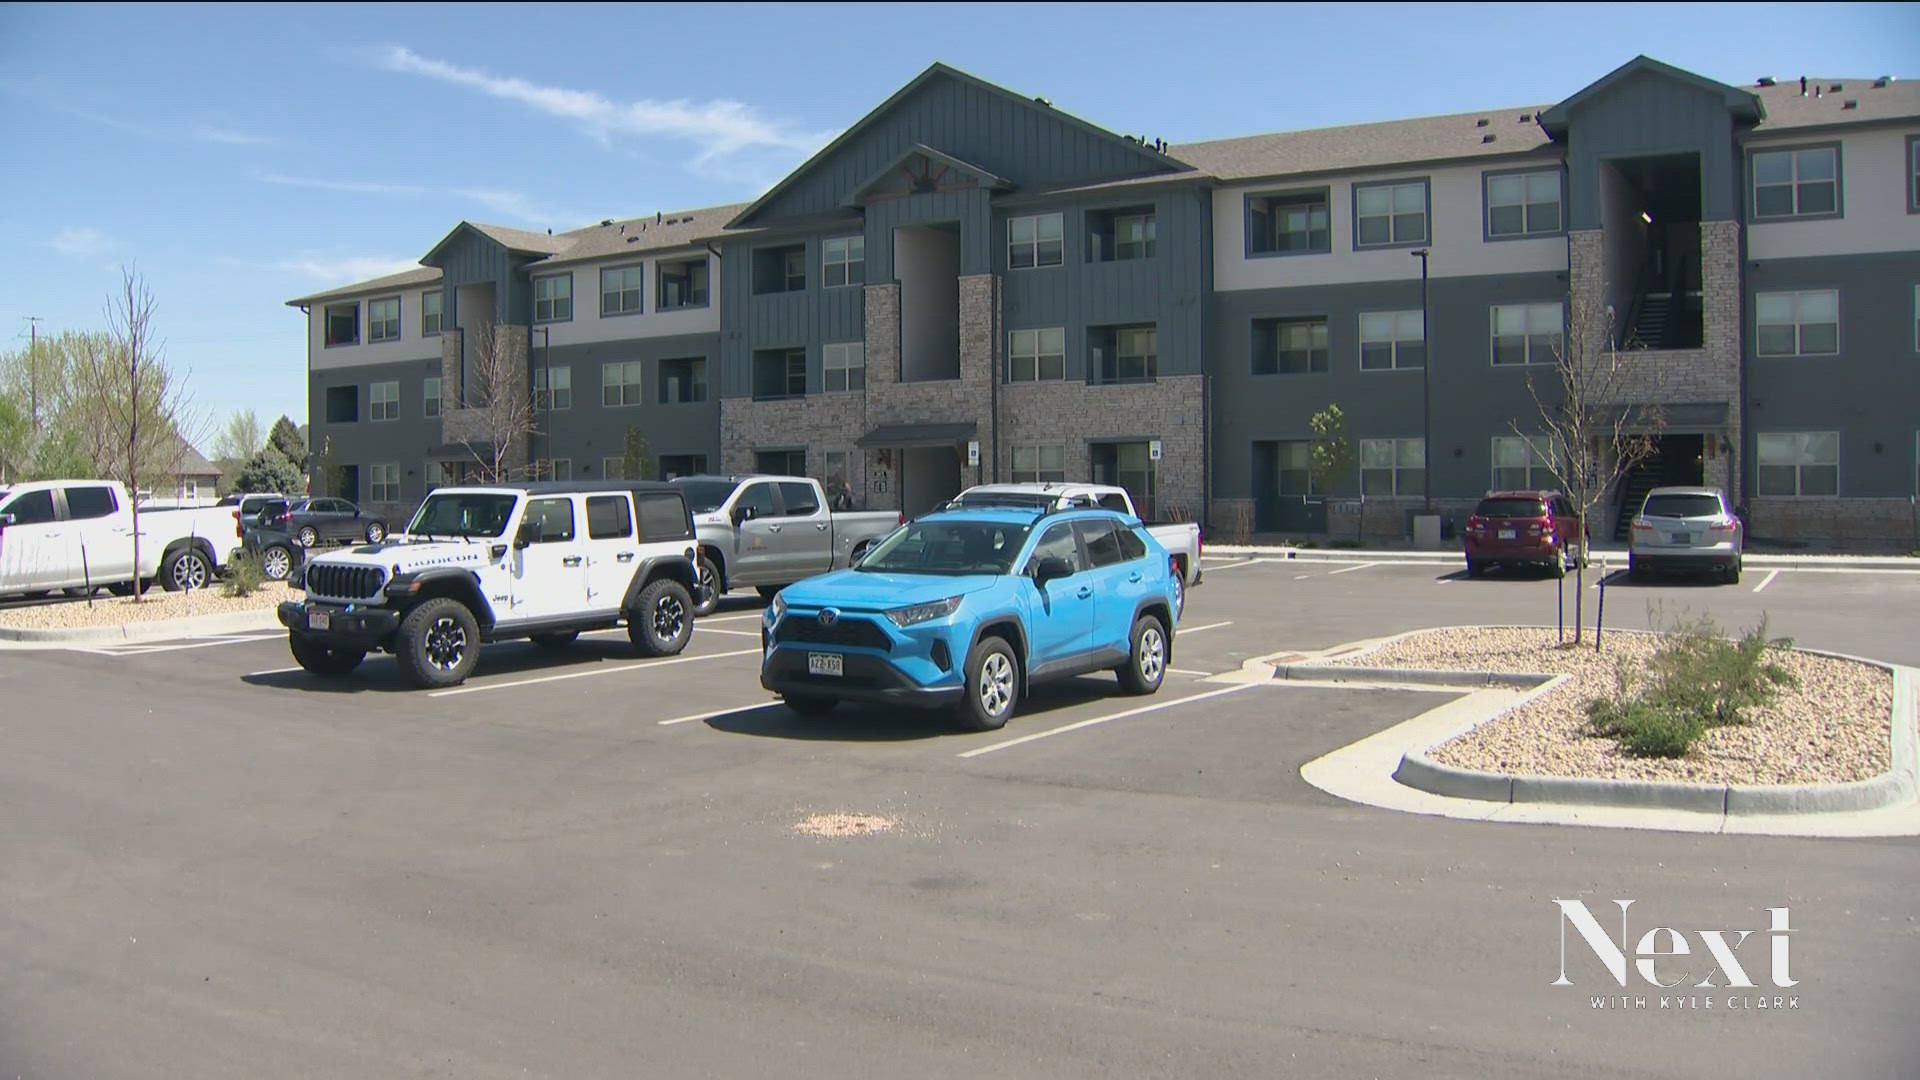 Coloradans have moved to places like Fort Lupton looking for affordable housing options, adding another layer to the housing shortage.